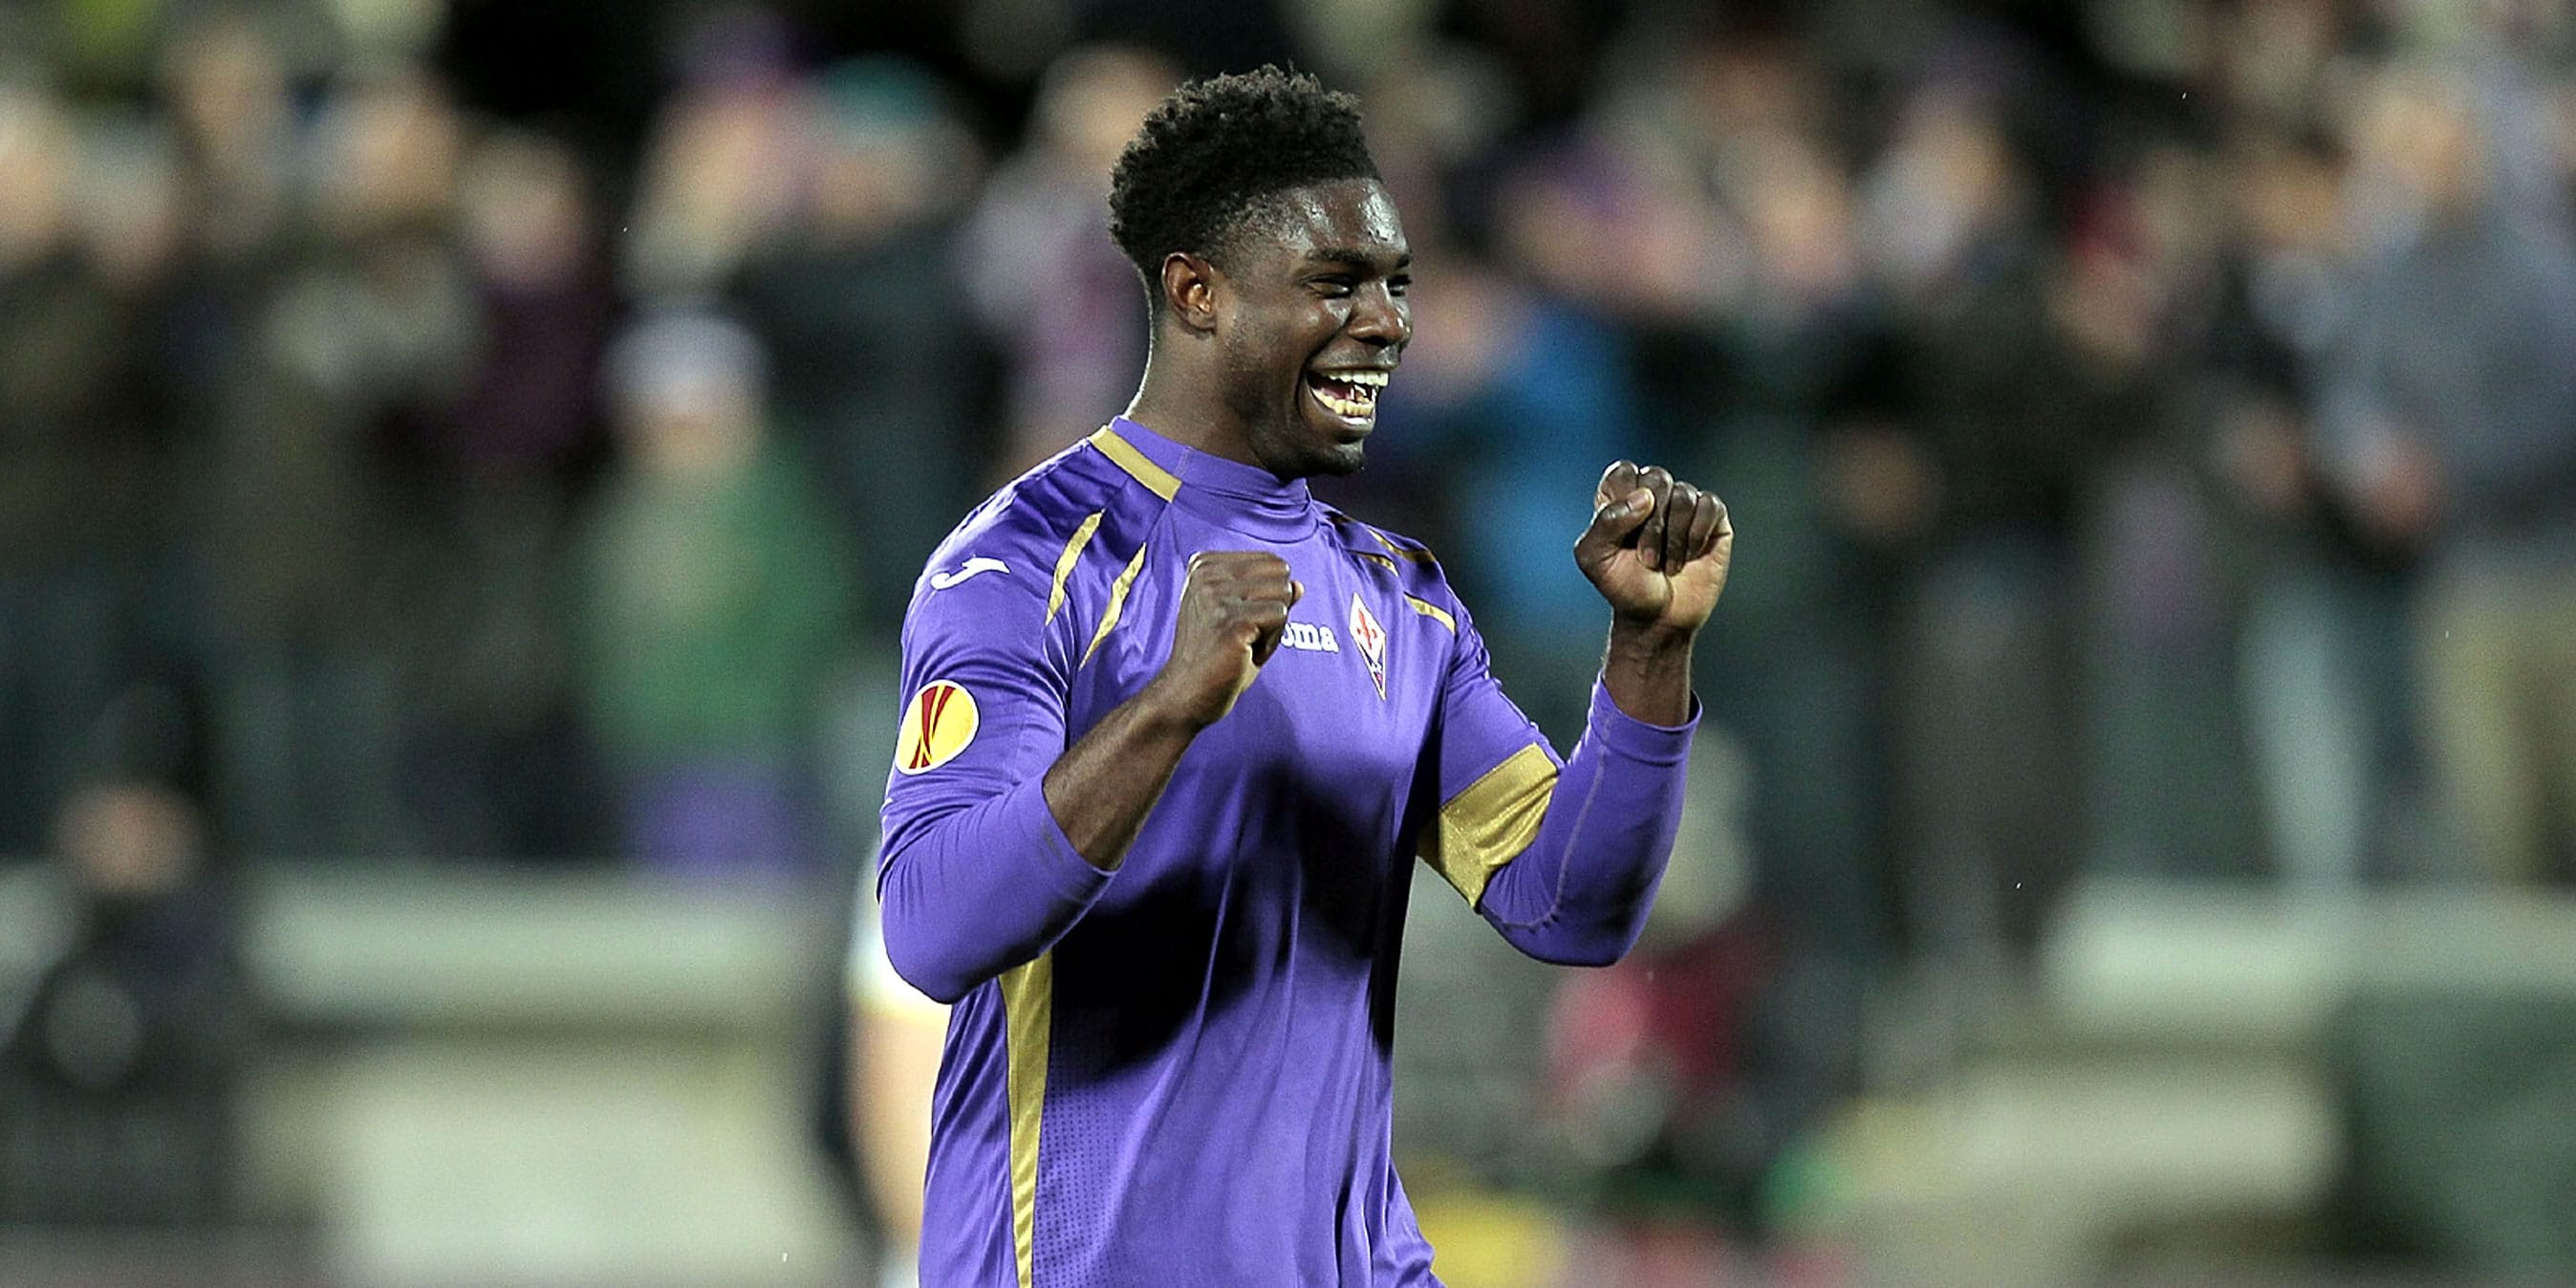 Micah Richards in action for Fiorentina